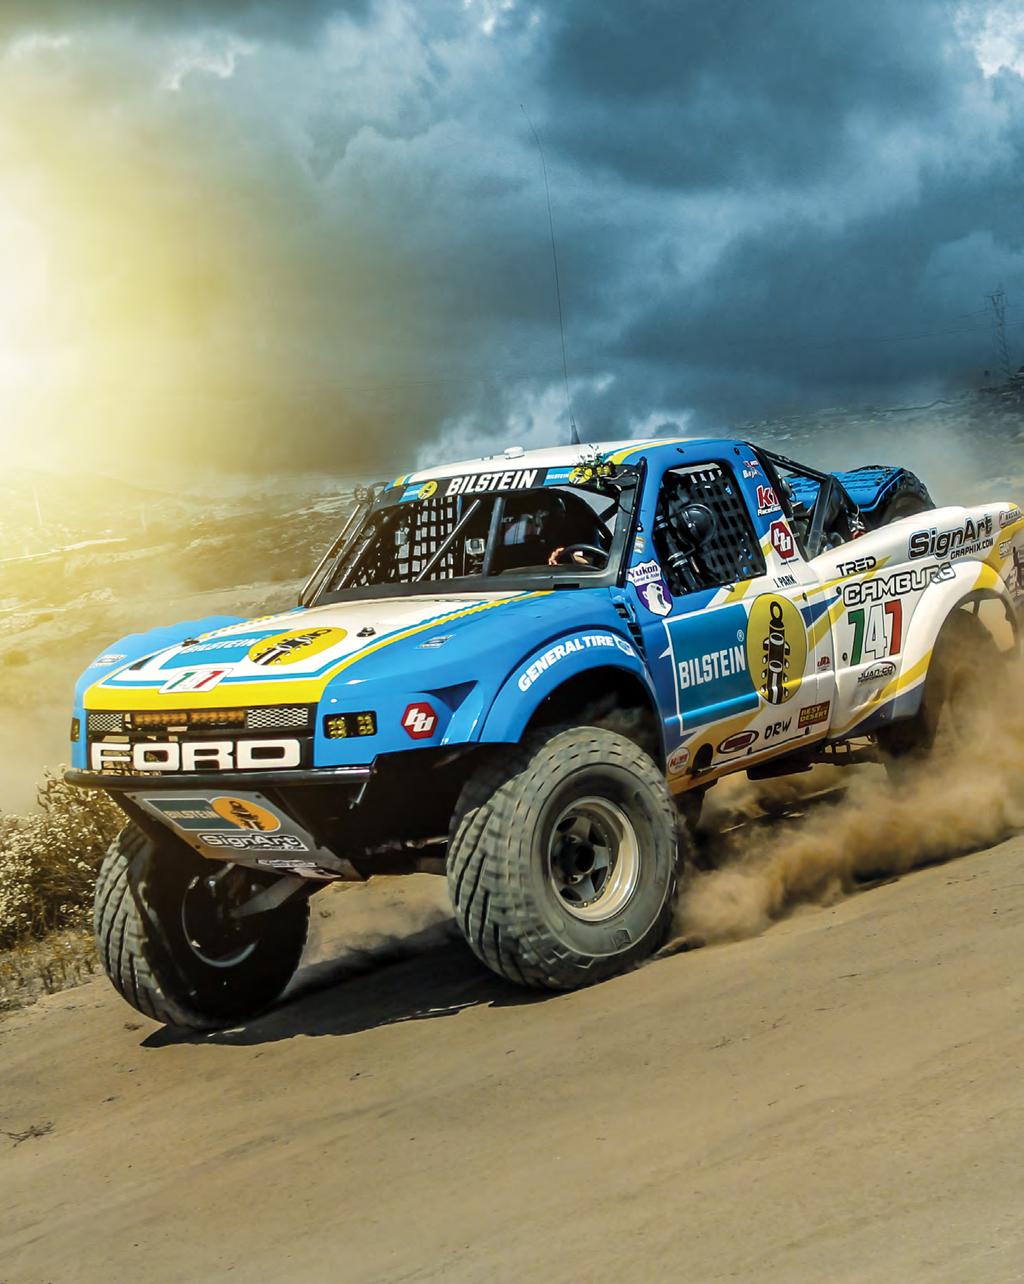 BILSTEIN B8 8125. PROFESSIONAL OFF-ROAD RACING. BILSTEIN B8 8125. For the off-road enthusiast.